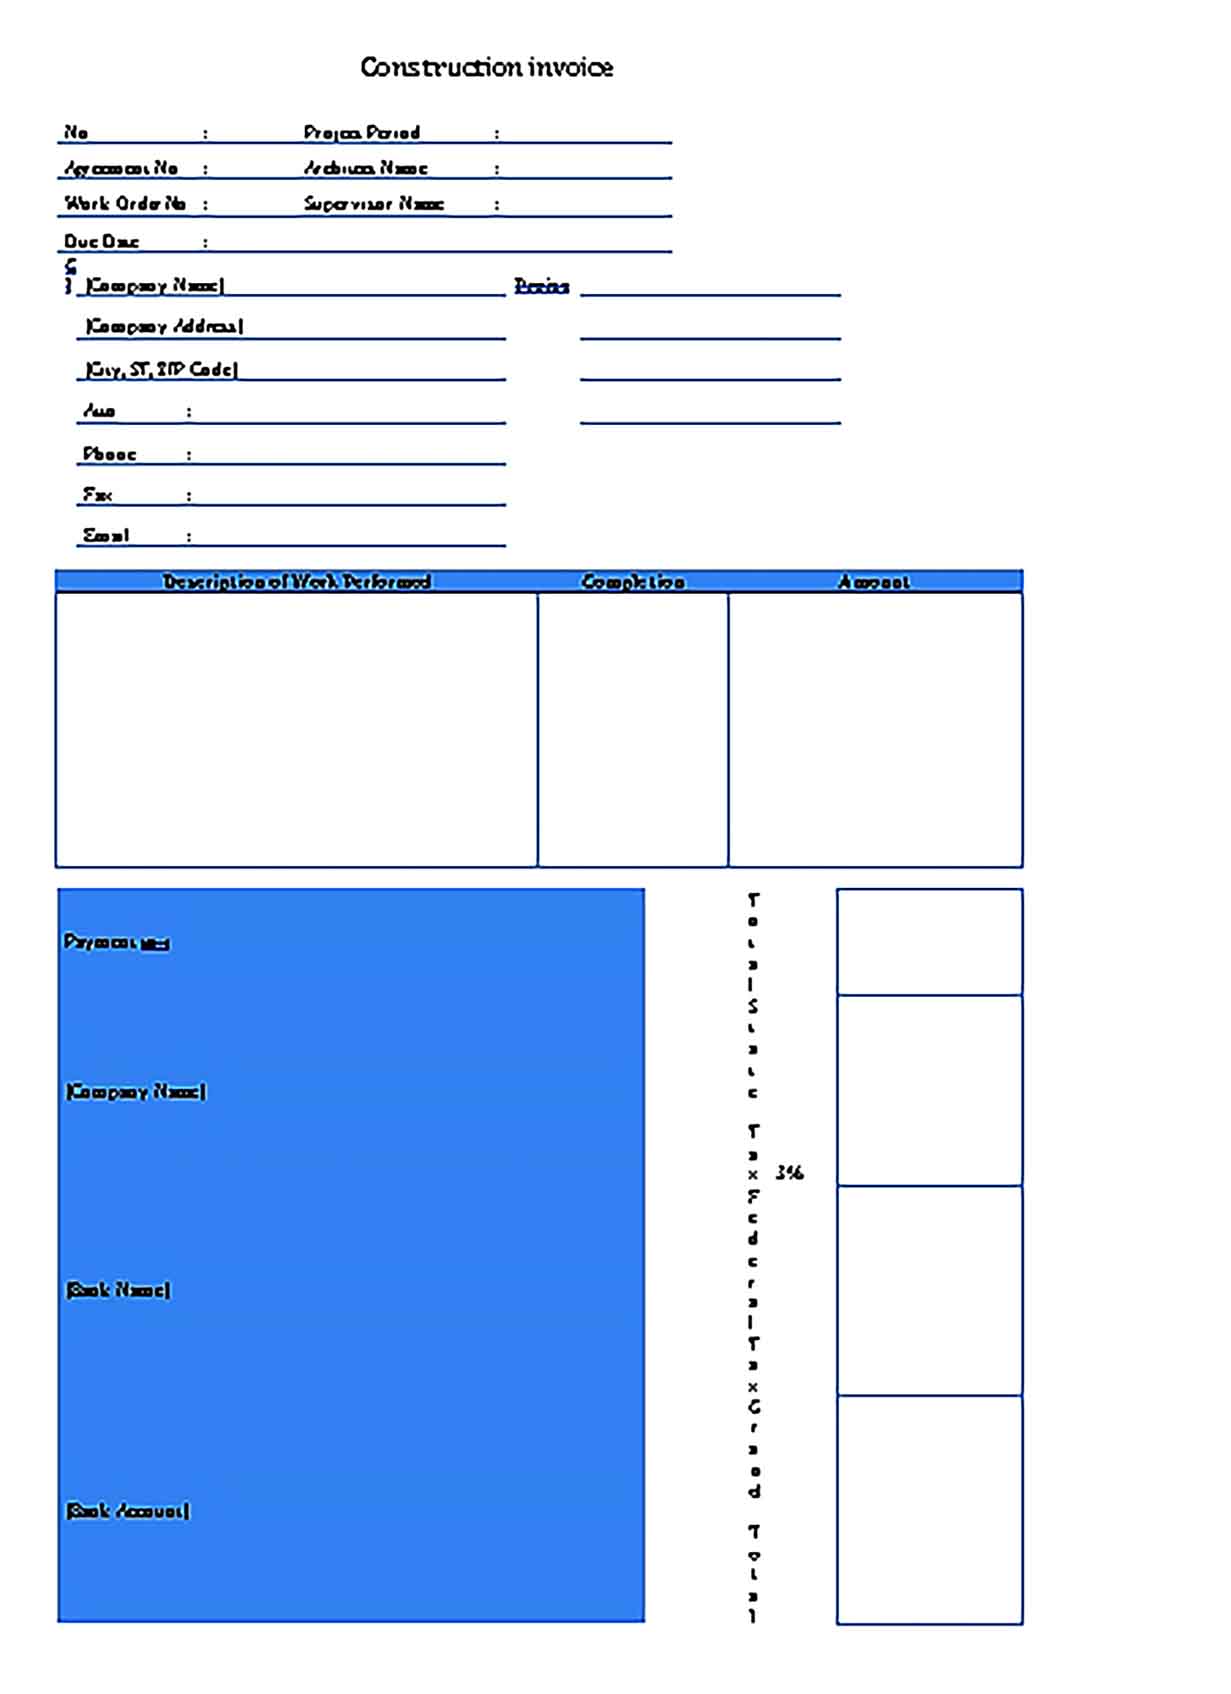 Sample Templates construction invoice word